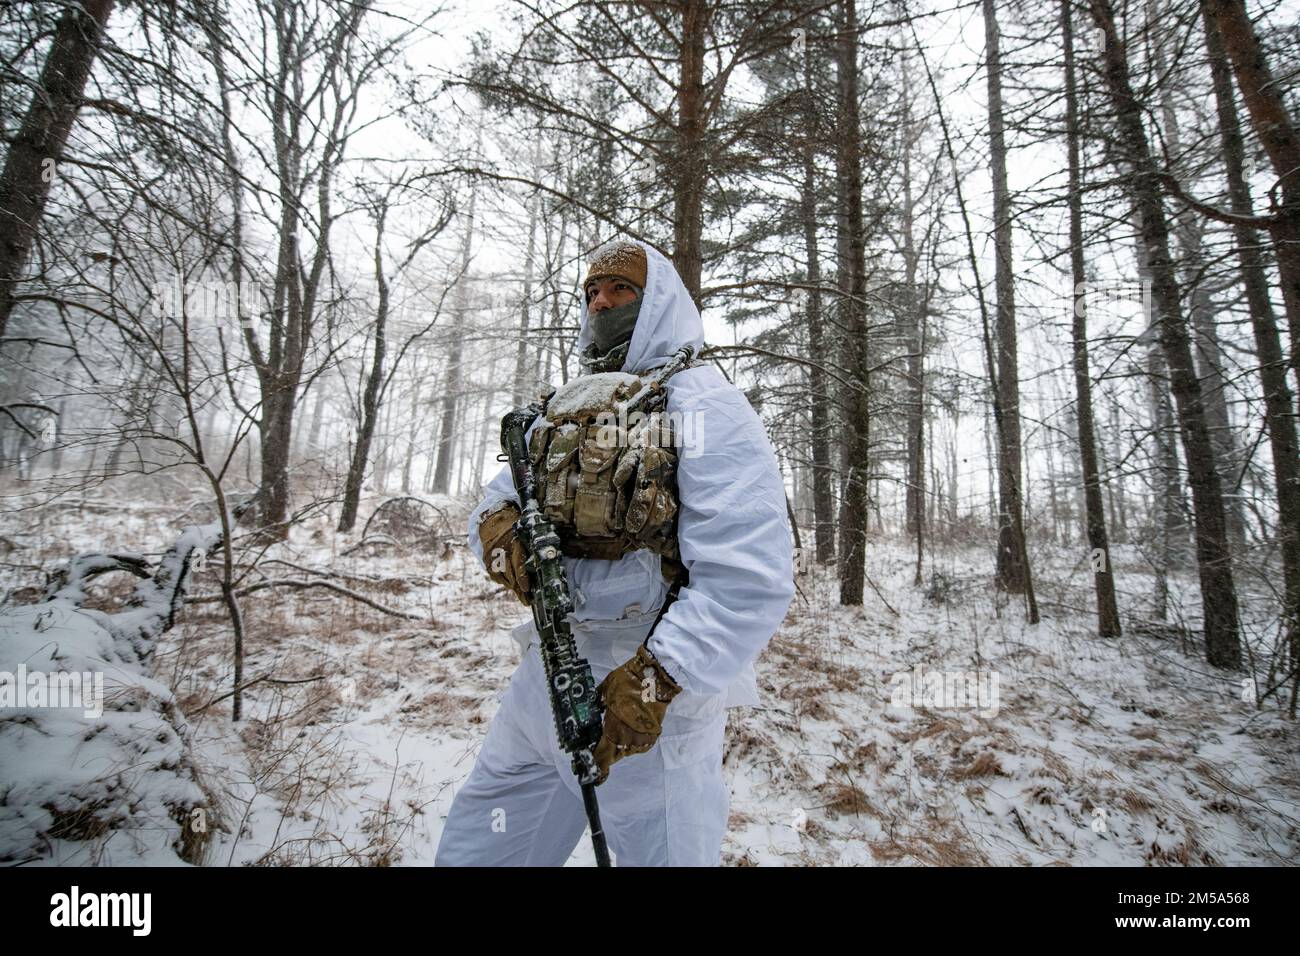 A U.S. Army paratrooper assigned to 1st Battalion, 503rd Parachute Infantry Regiment moves in a fire team wedge through the woods while conducting an integrated procedure familiarization alongside Italian soldiers from the 3rd Alpini Regiment. This training is part of Exercise Steel Blizzard at Pian dell’Alpe in Usseaux, Italy on Feb. 14, 2022.     Exercise Steel Blizzard is an Italian Army-hosted multinational mountain and arctic warfare training exercise. Three reconnaissance platoons from the 173rd Airborne Brigade take part in a three-phase training regimen with the 3rd Alpini Regiment to Stock Photo